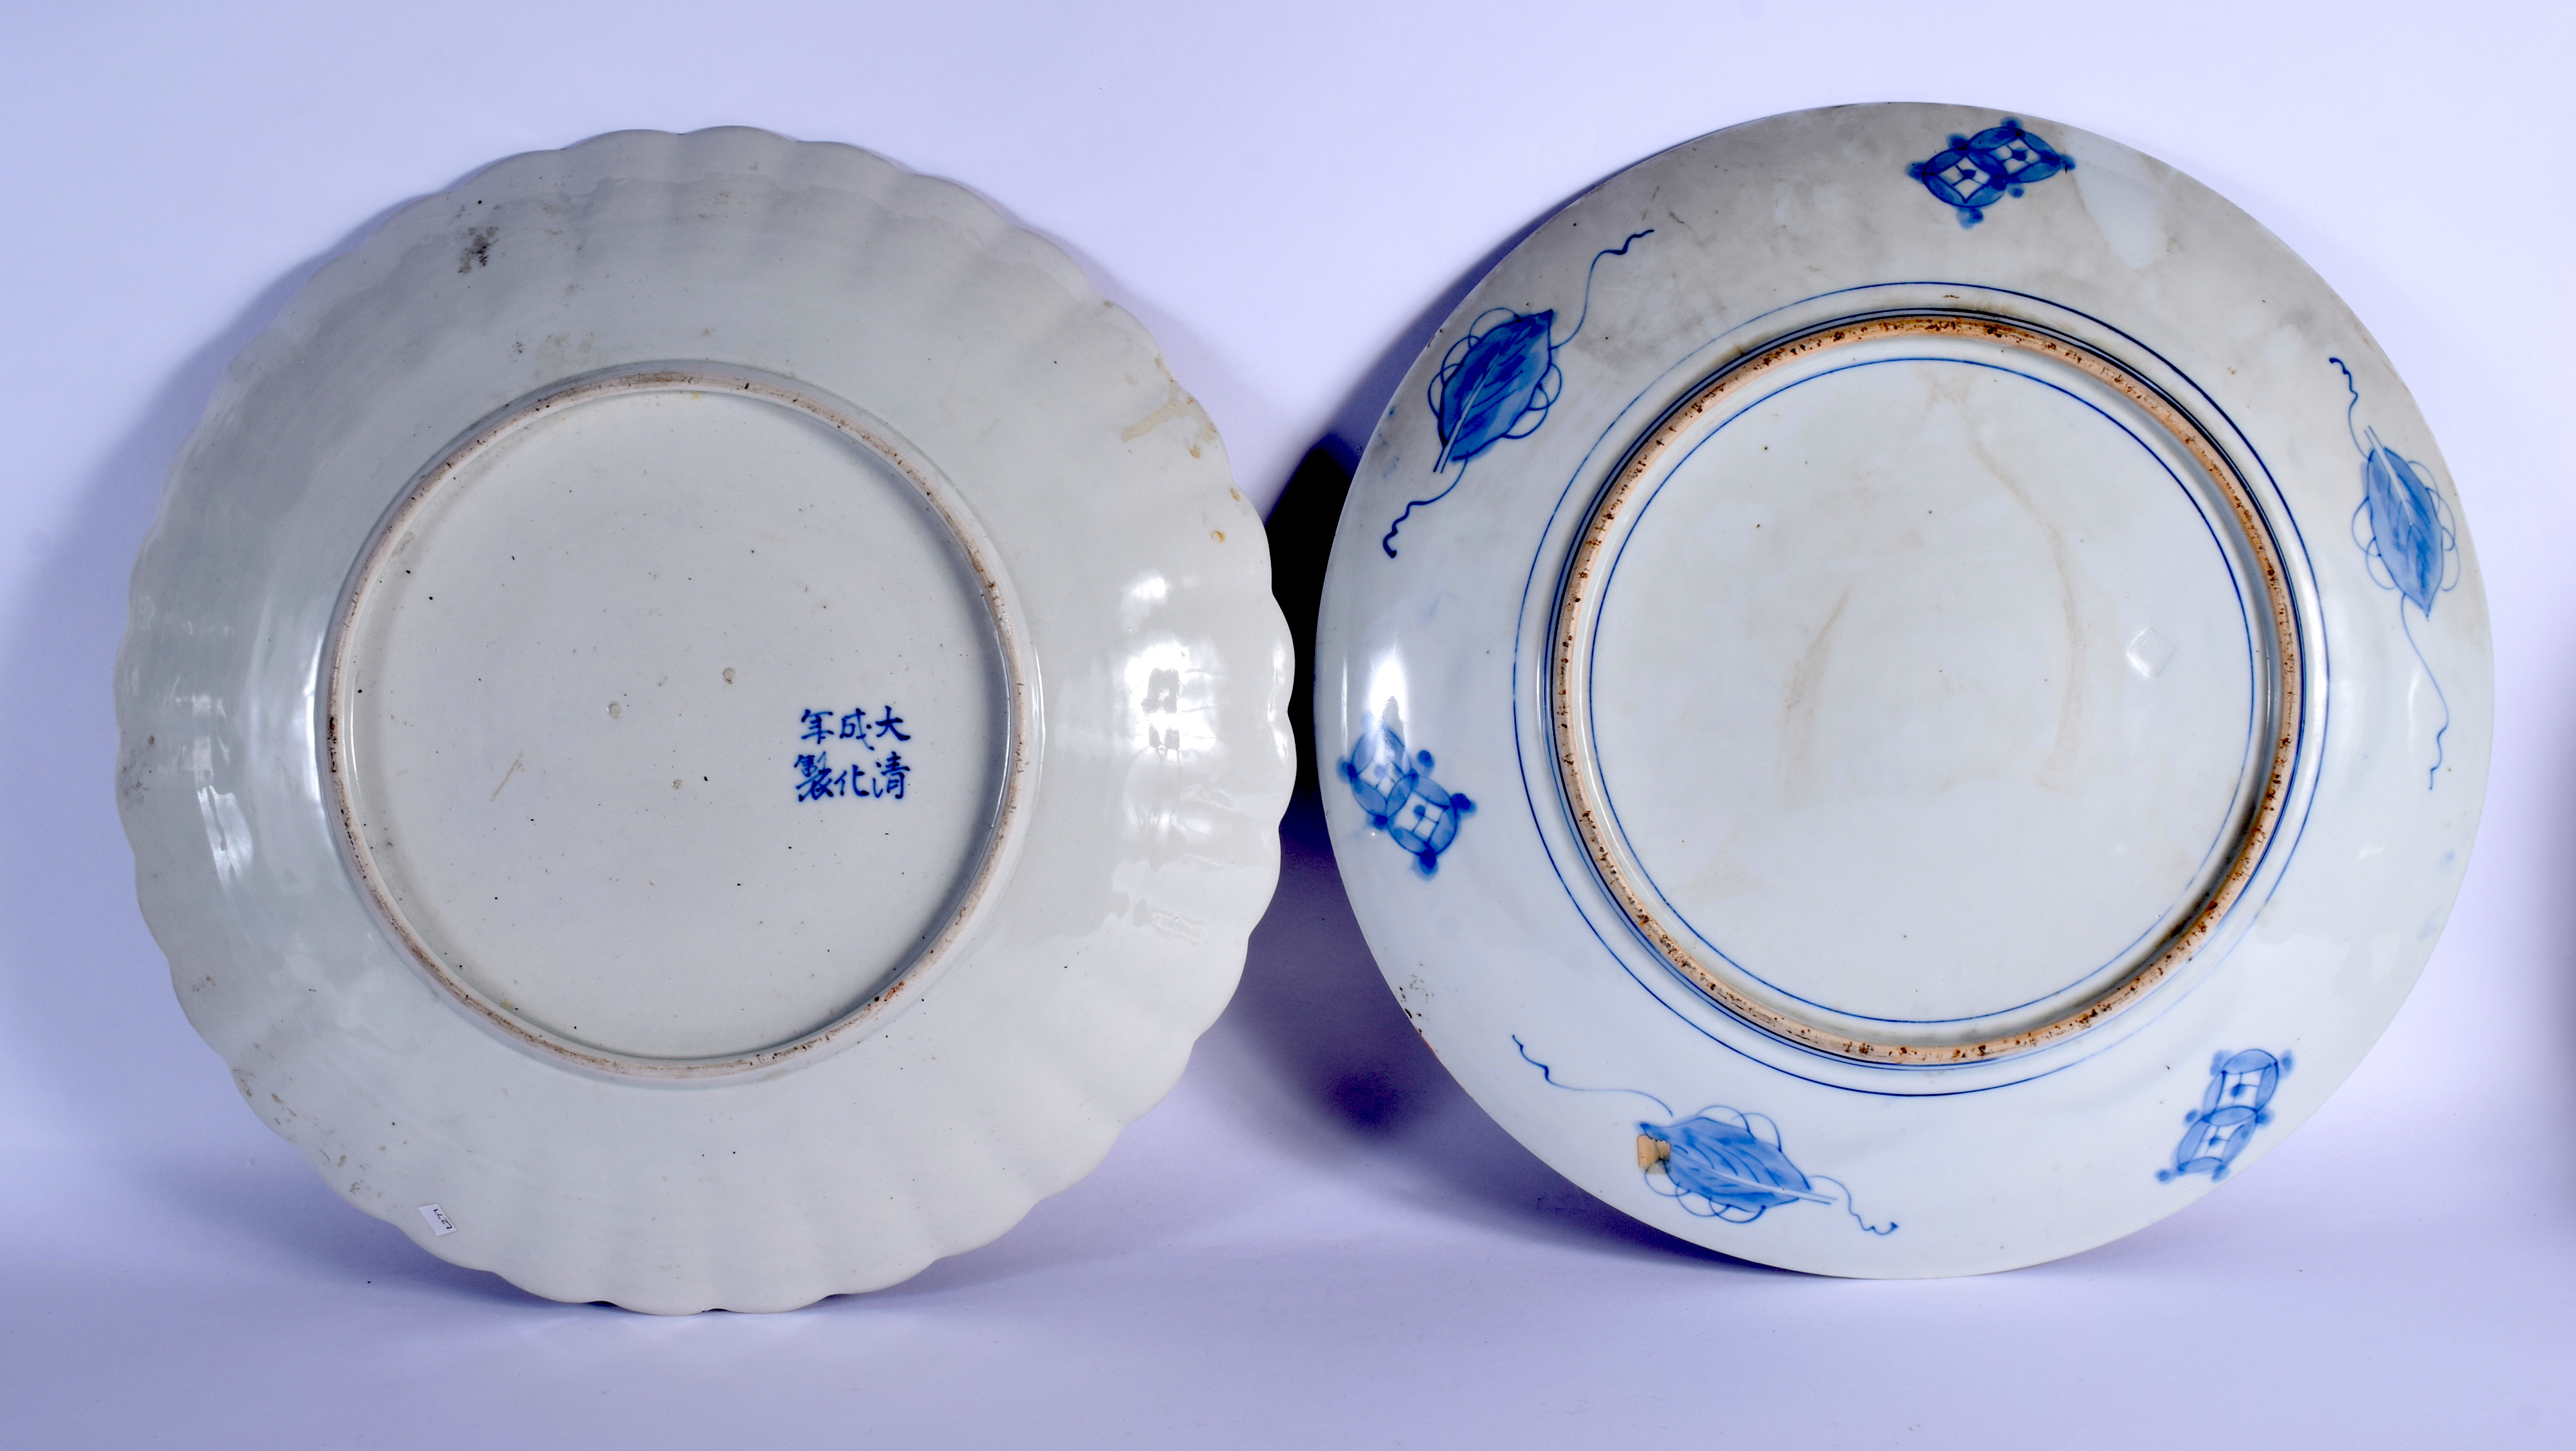 TWO LARGE 19TH CENTURY JAPANESE MEIJI PERIOD PORCELAIN CHARGERS. 48 cm wide. (2) - Image 2 of 2